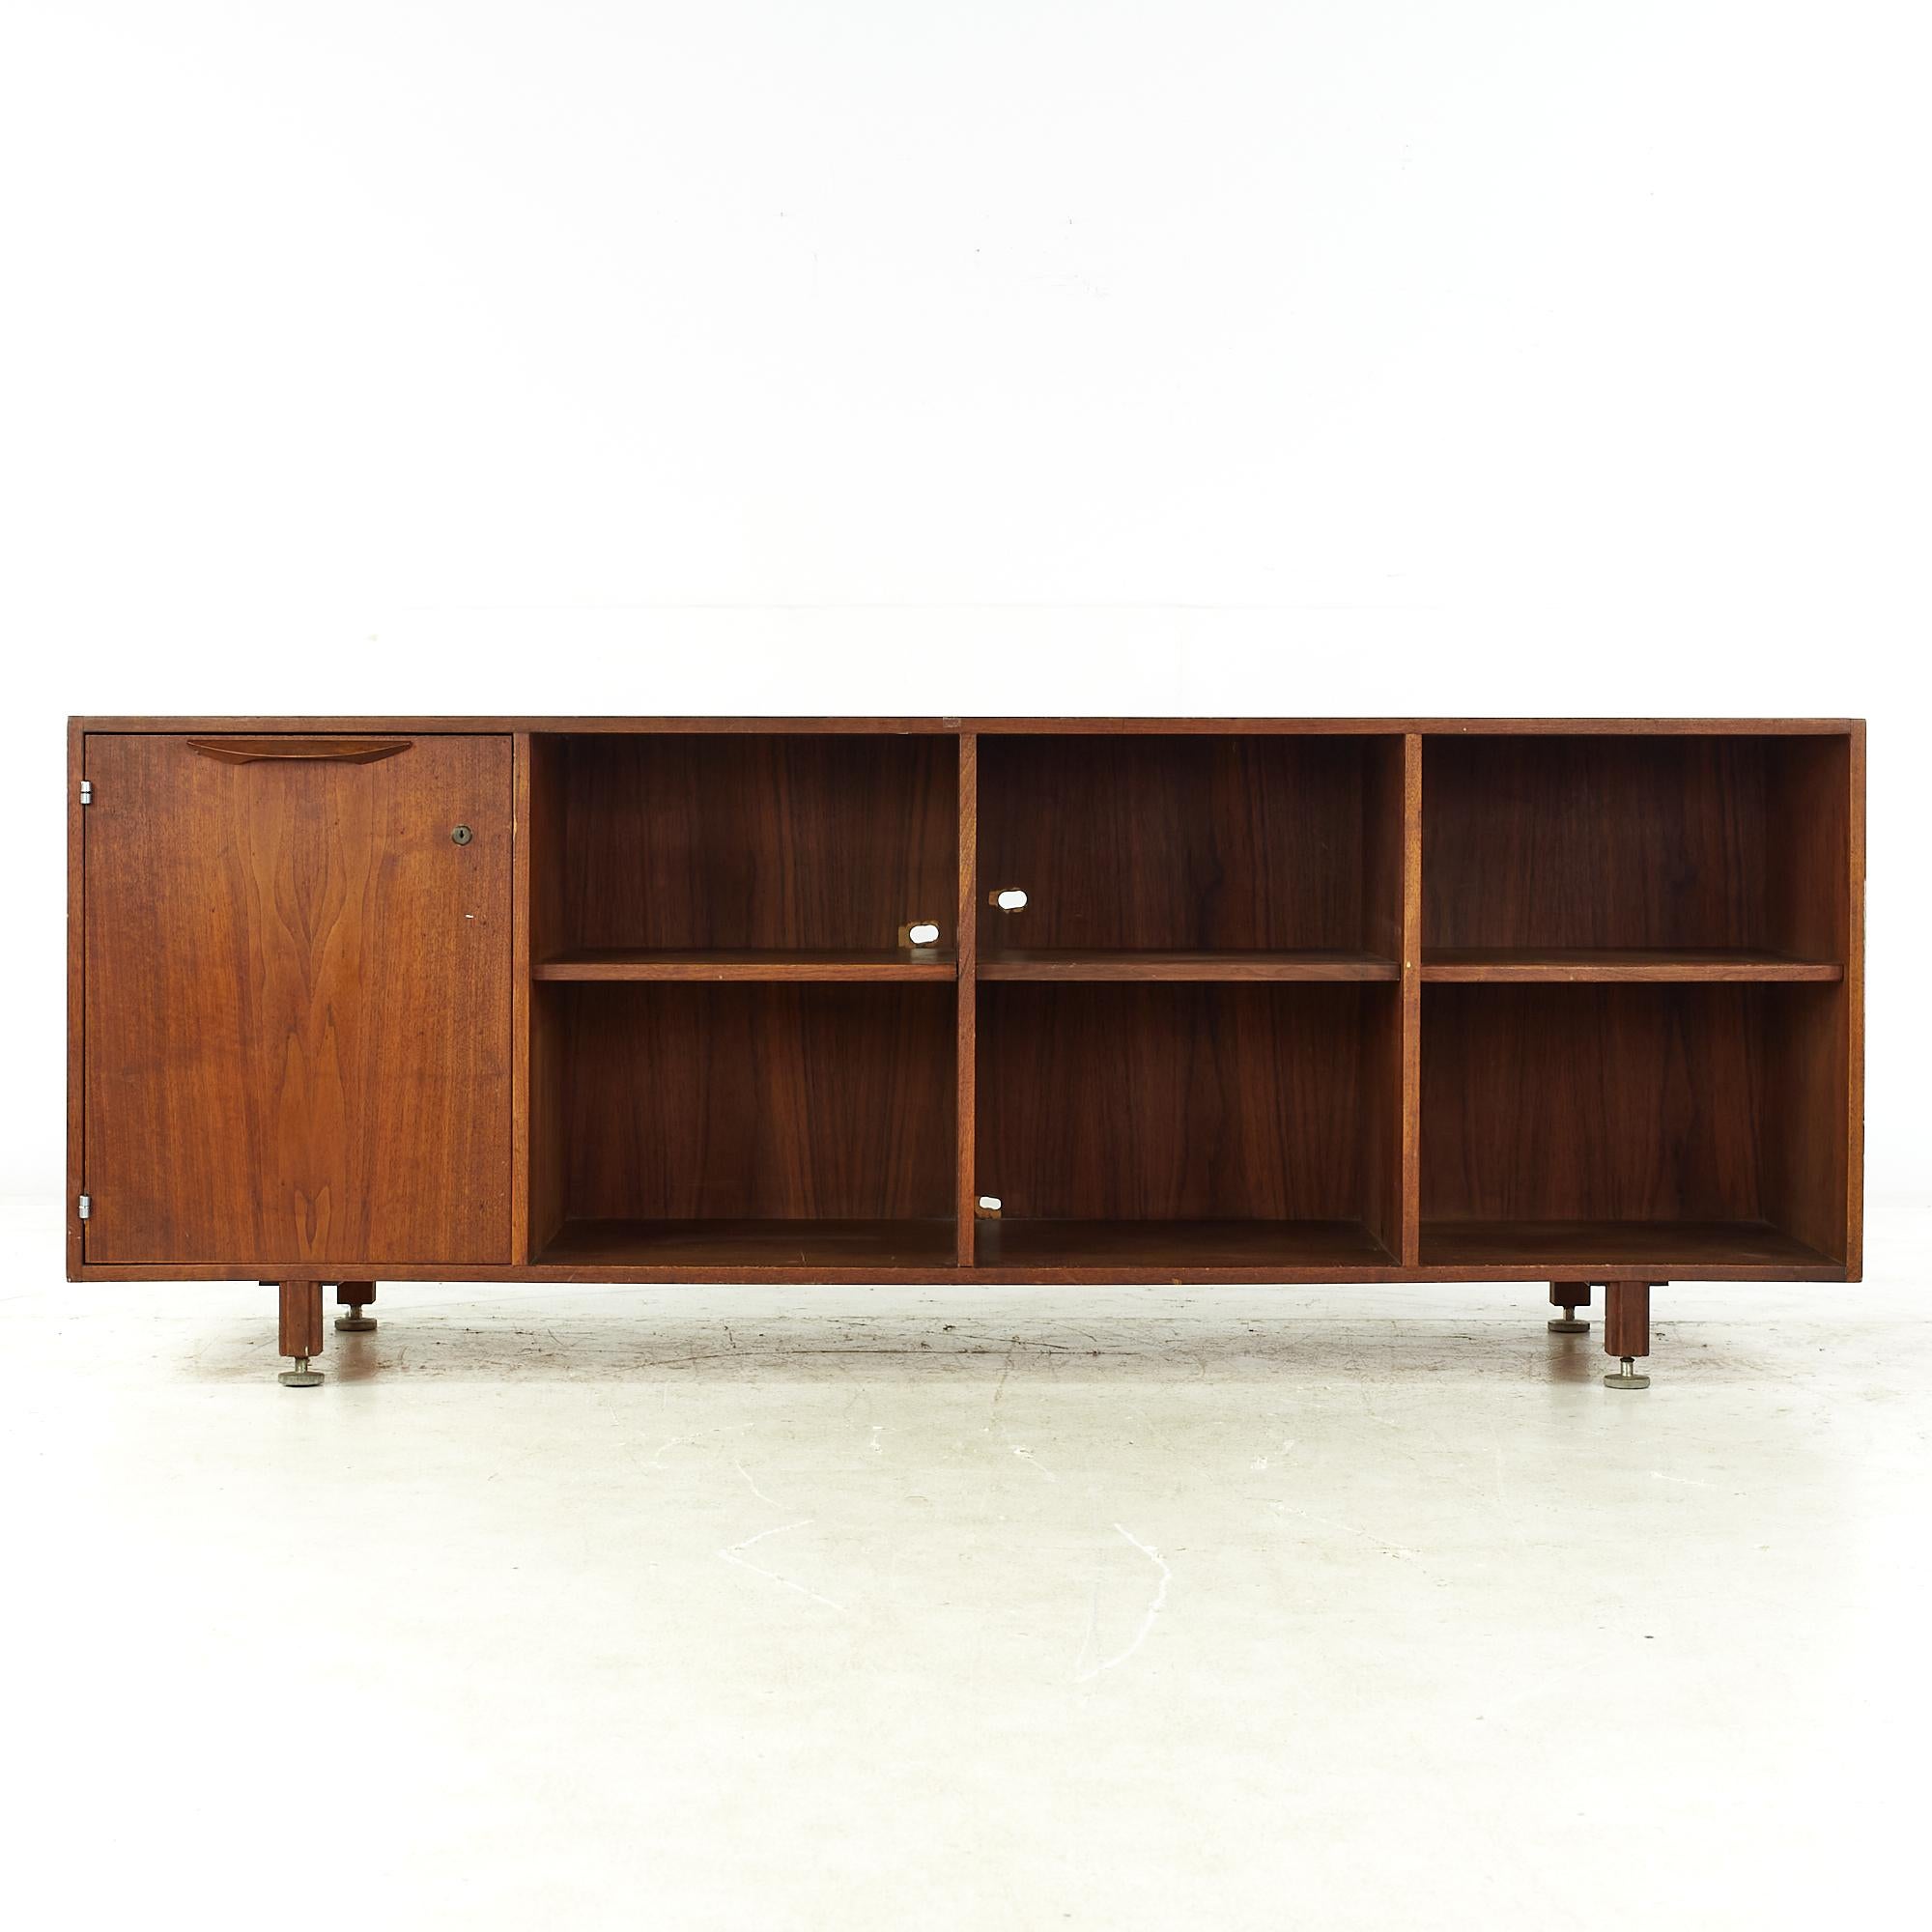 Jens Risom midcentury walnut bookcase credenza

This credenza measures: 77.75 wide x 20 deep x 29.25 inches high

All pieces of furniture can be had in what we call restored vintage condition. That means the piece is restored upon purchase so